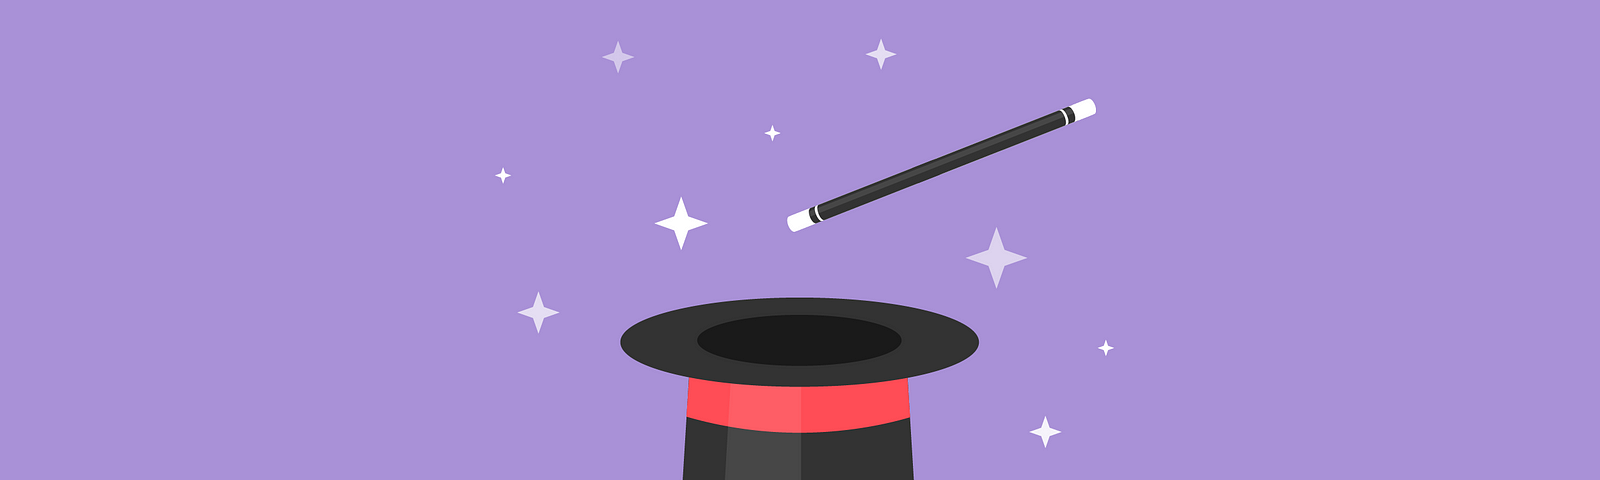 Illustration of an upside-down top hat with a magic wand above it, and sparkles.